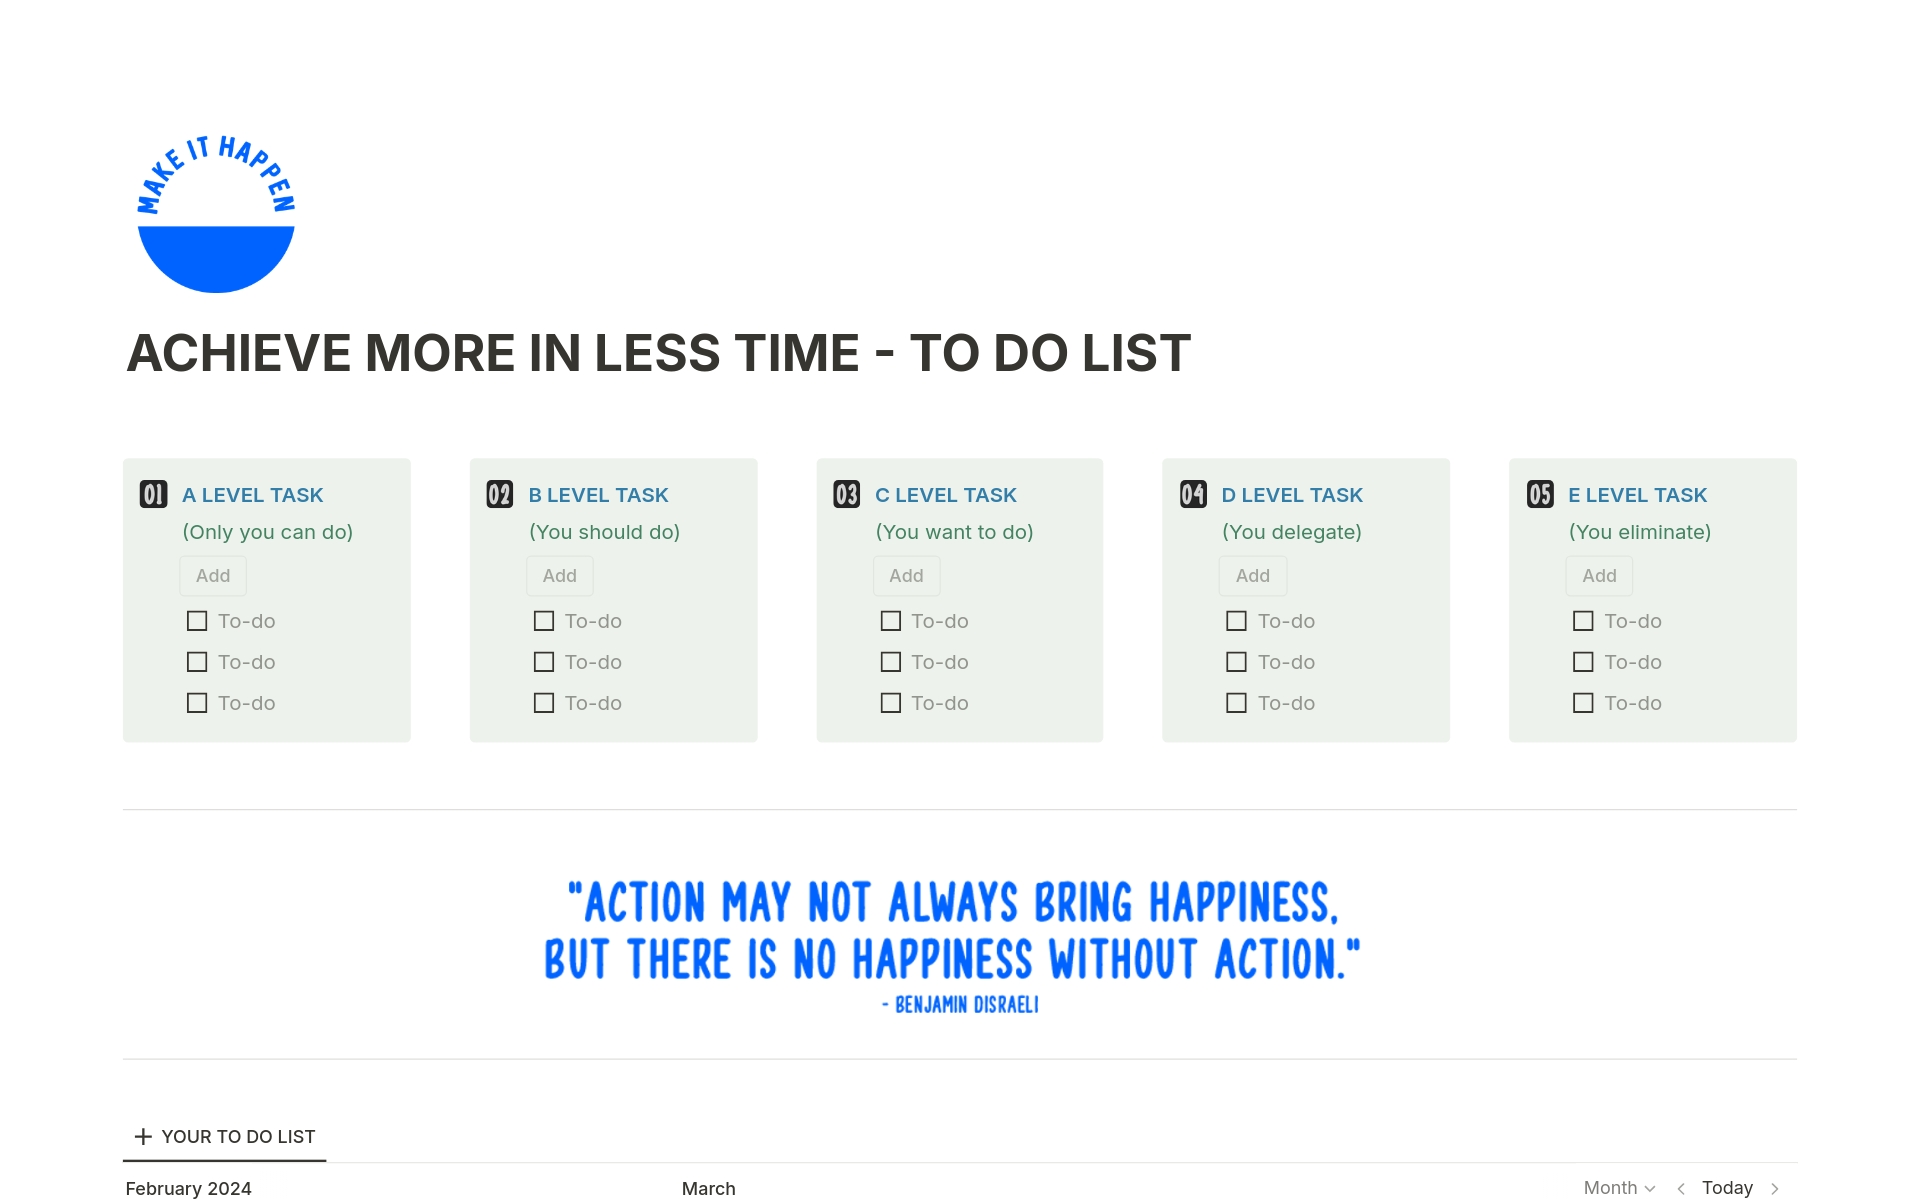 ACHIEVE MORE IN LESS TIME - TO DO LISTのテンプレートのプレビュー